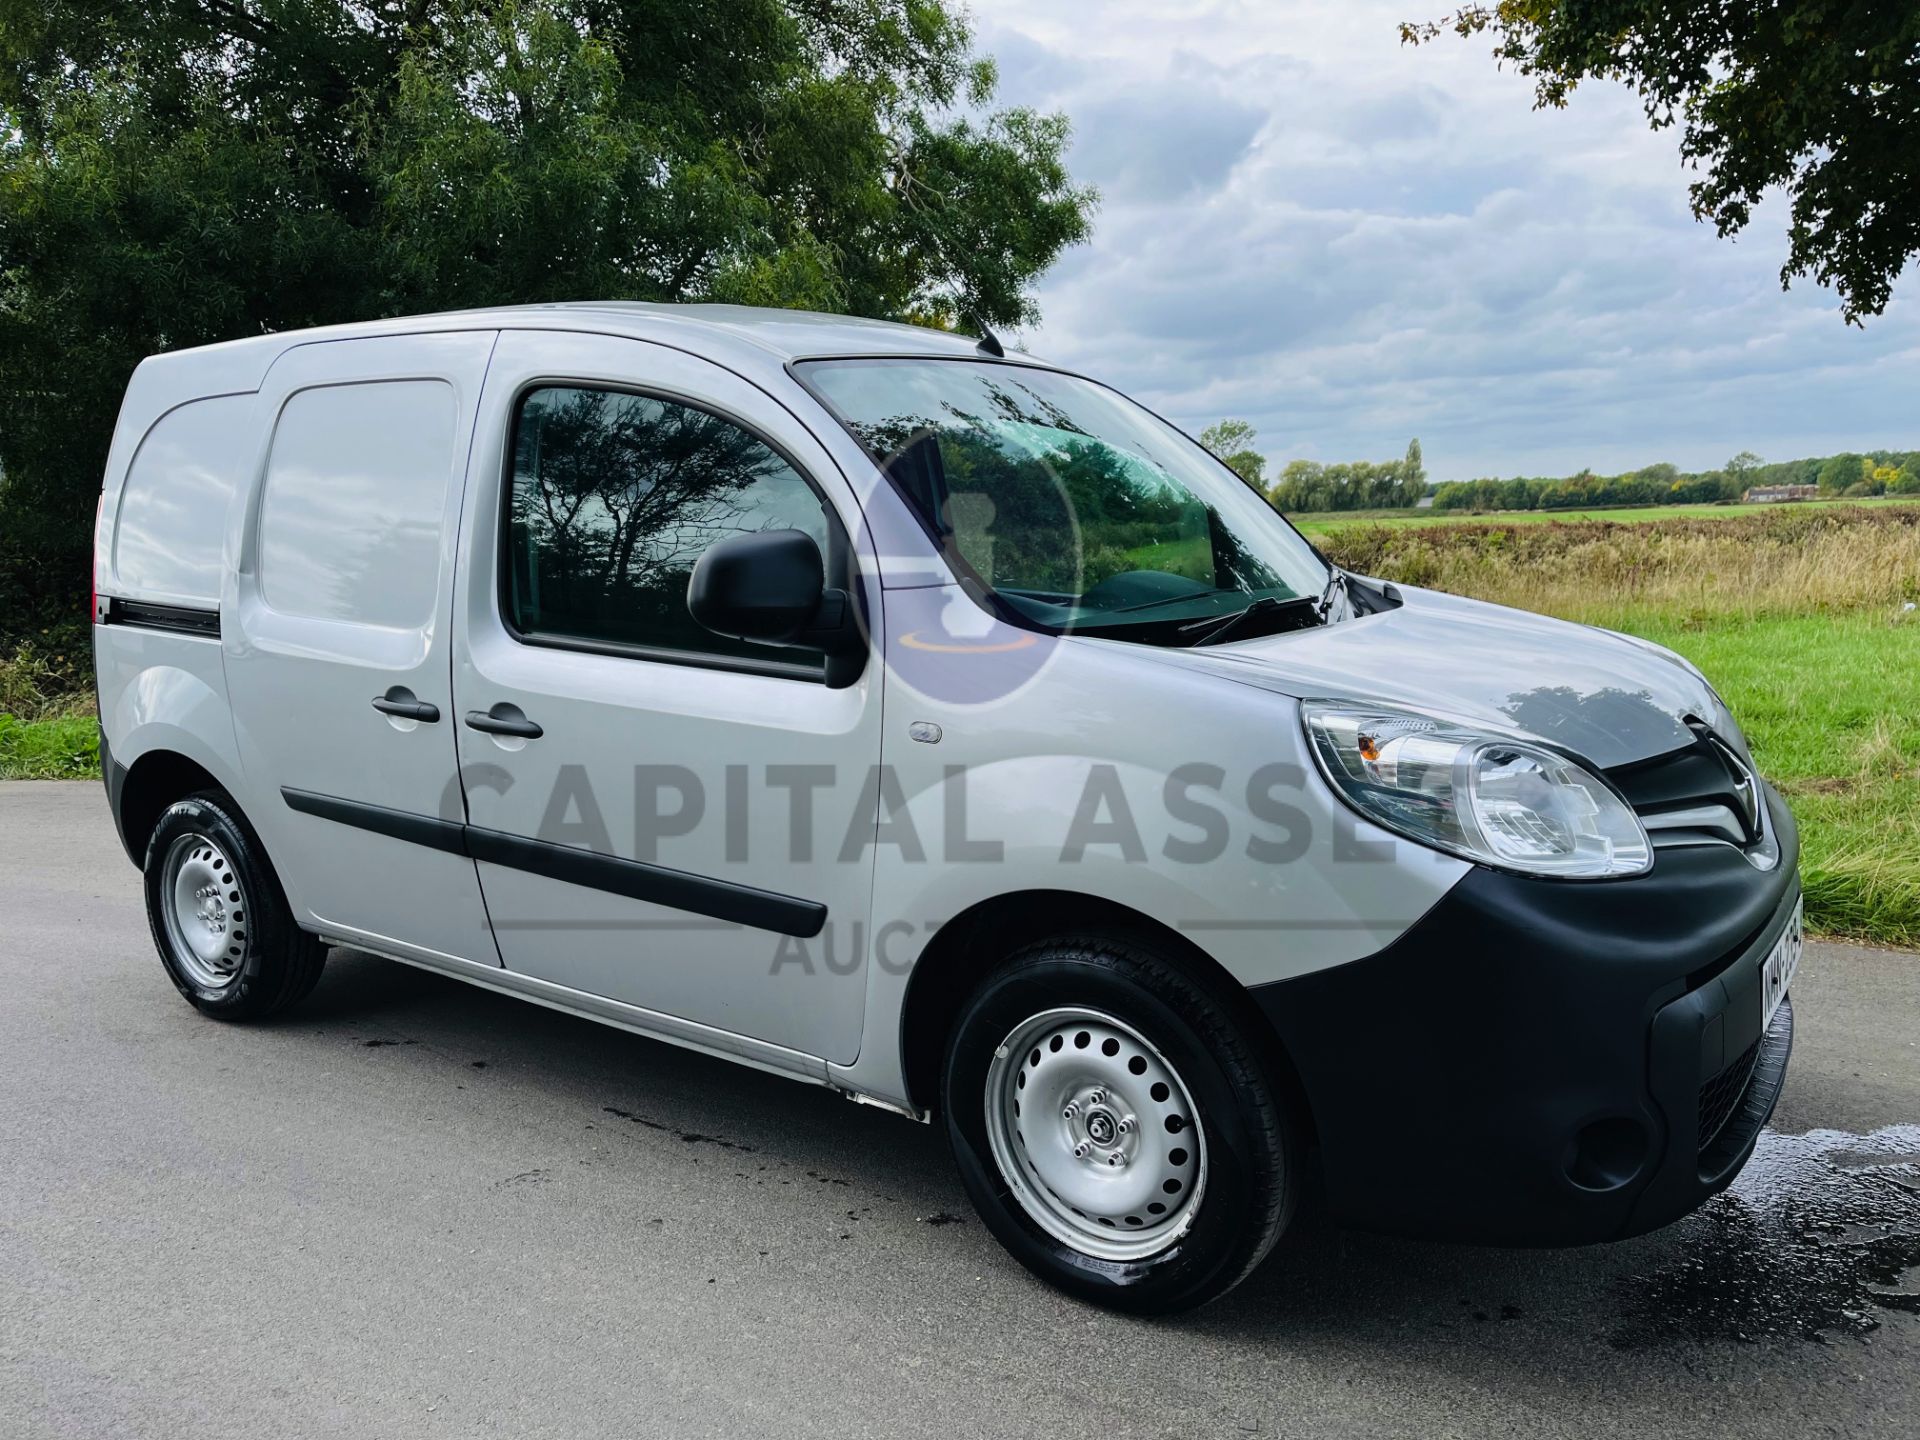 RENAULT KANGOO 1.5DCI "BUSINESS EDITION" (2018) EURO 6 - 6 SPEED - AIR CON - STOP / START -ELEC PACK - Image 2 of 22